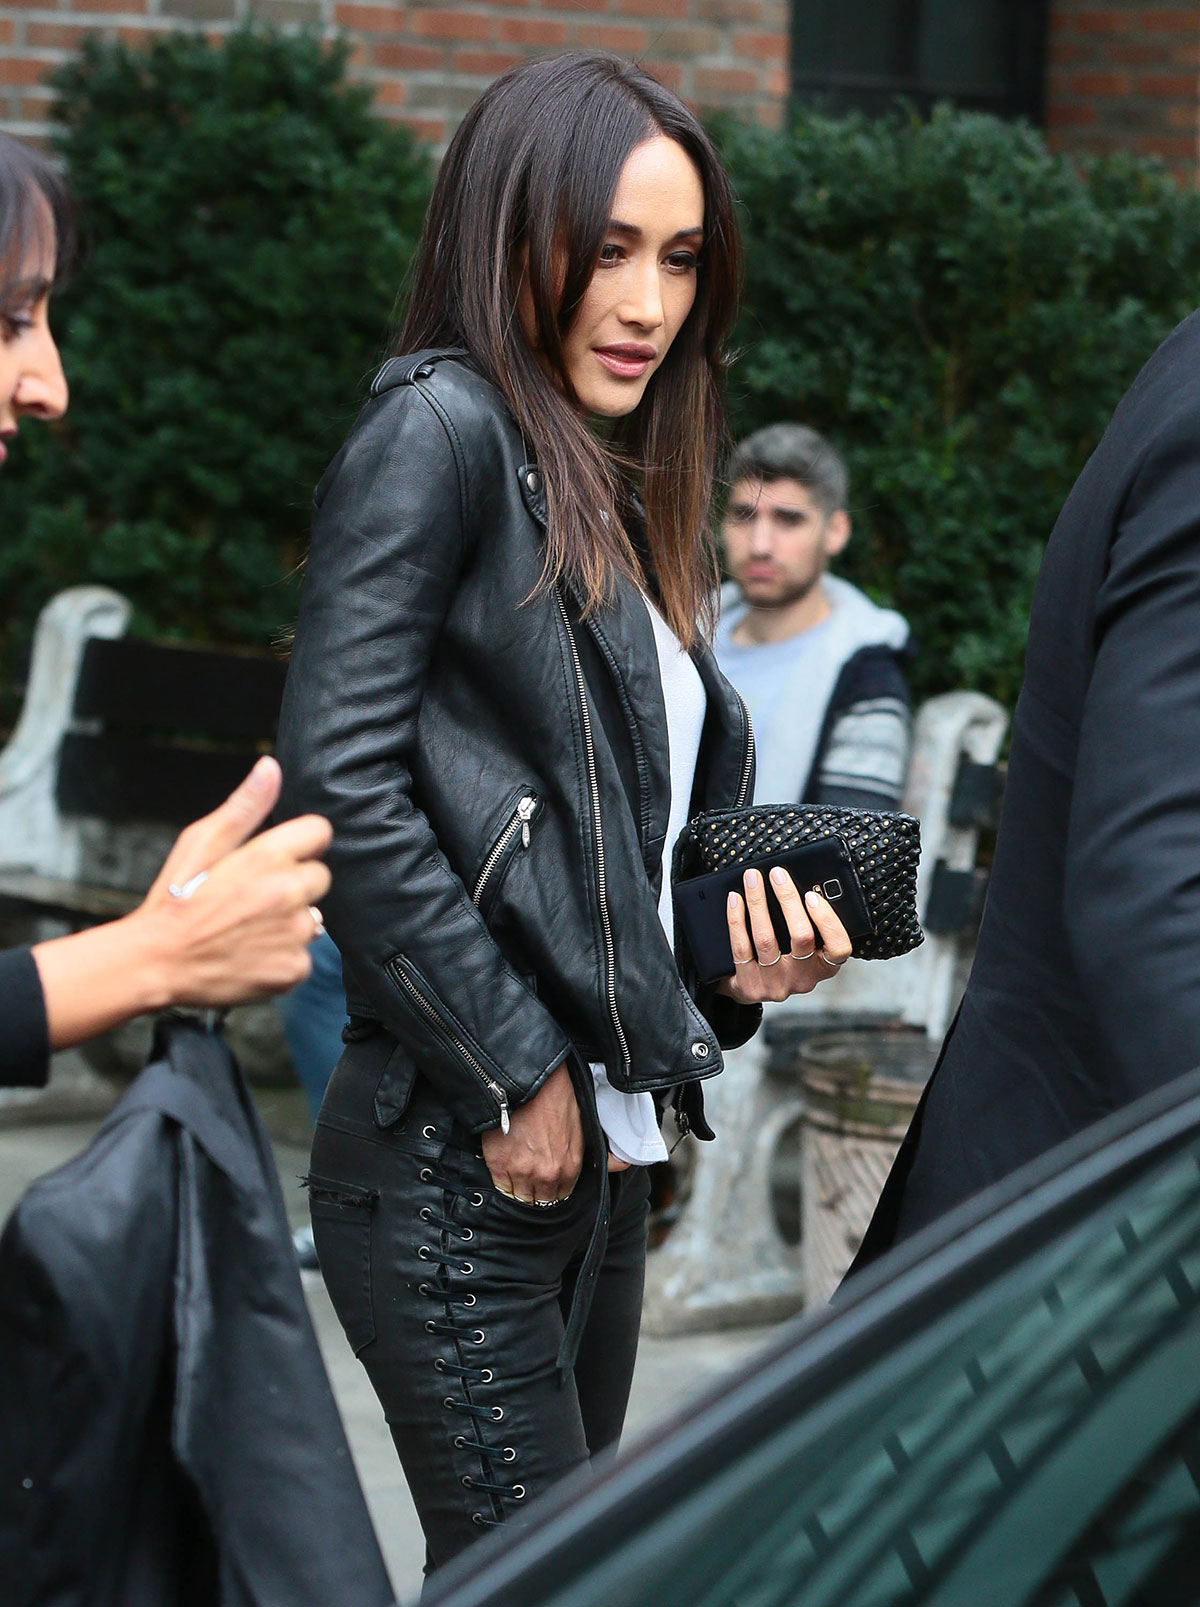 Maggie Q was spotted leaving the Bowery Hotel